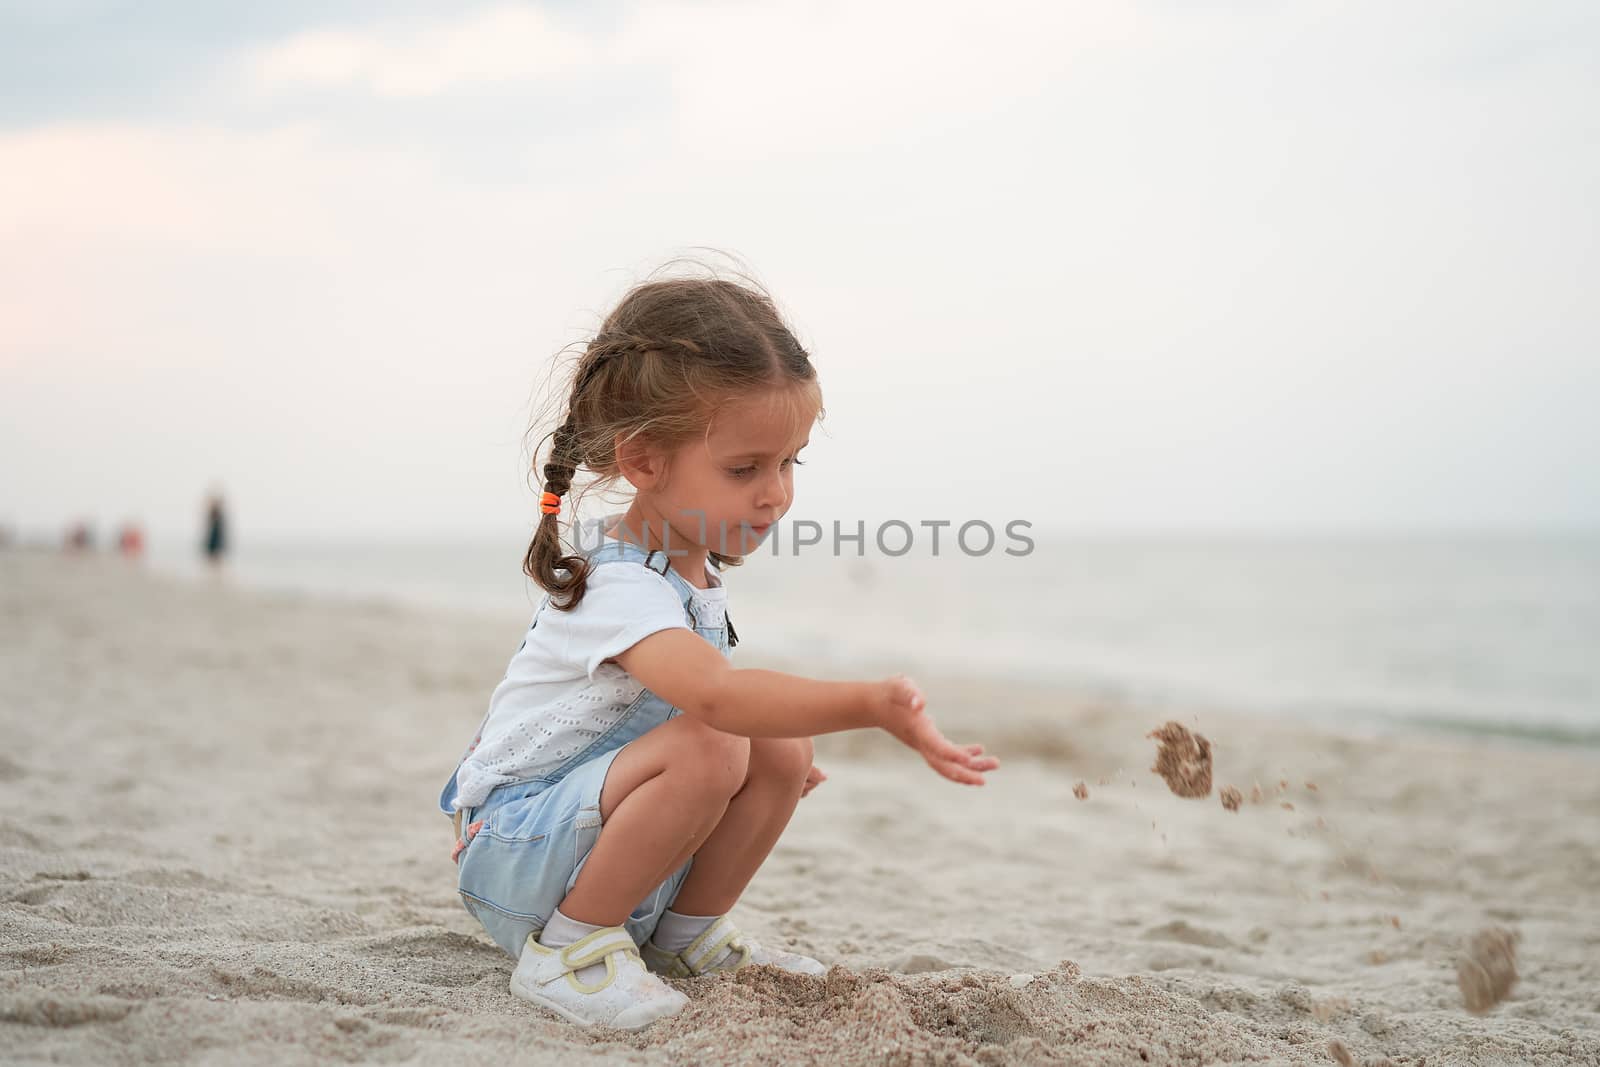 Child playing sand beach Little girl play sad alone summer family vacation Caucasian female 3 years old dressed denim near sea water